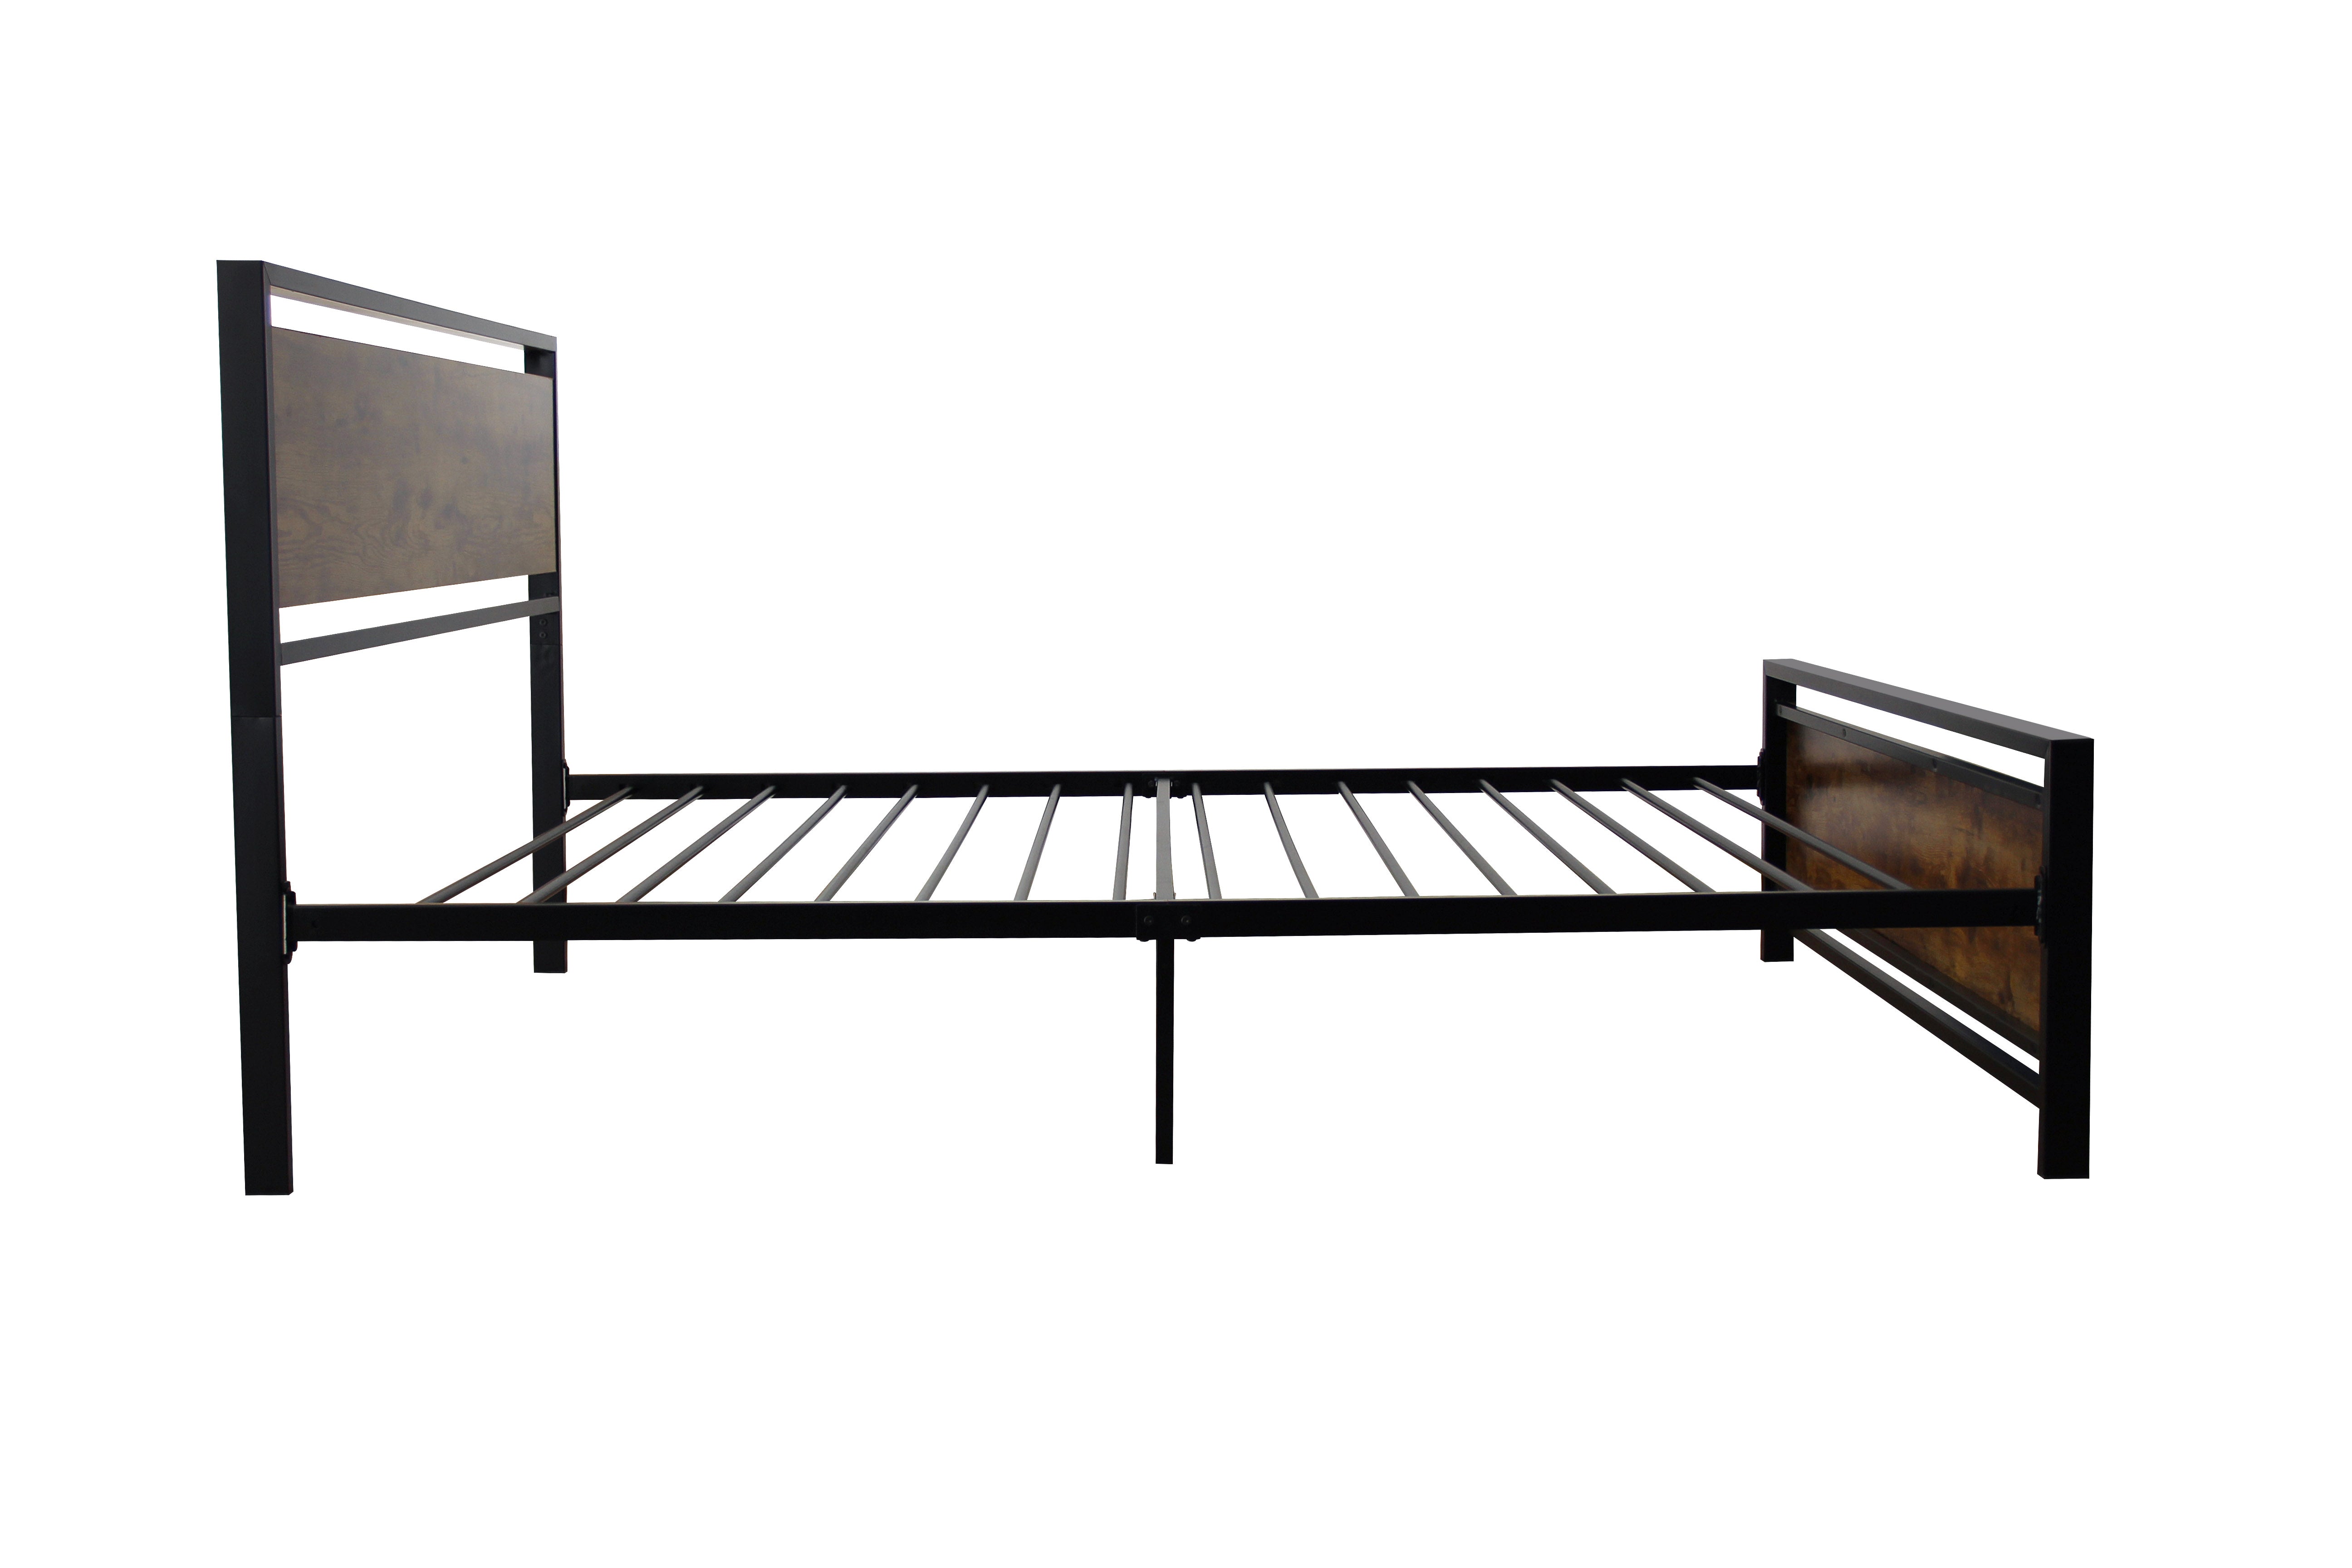 ZNTS Twin Size metal bed Sturdy System Metal Bed Frame ,Modern style and comfort to any bedroom ,black W114141108